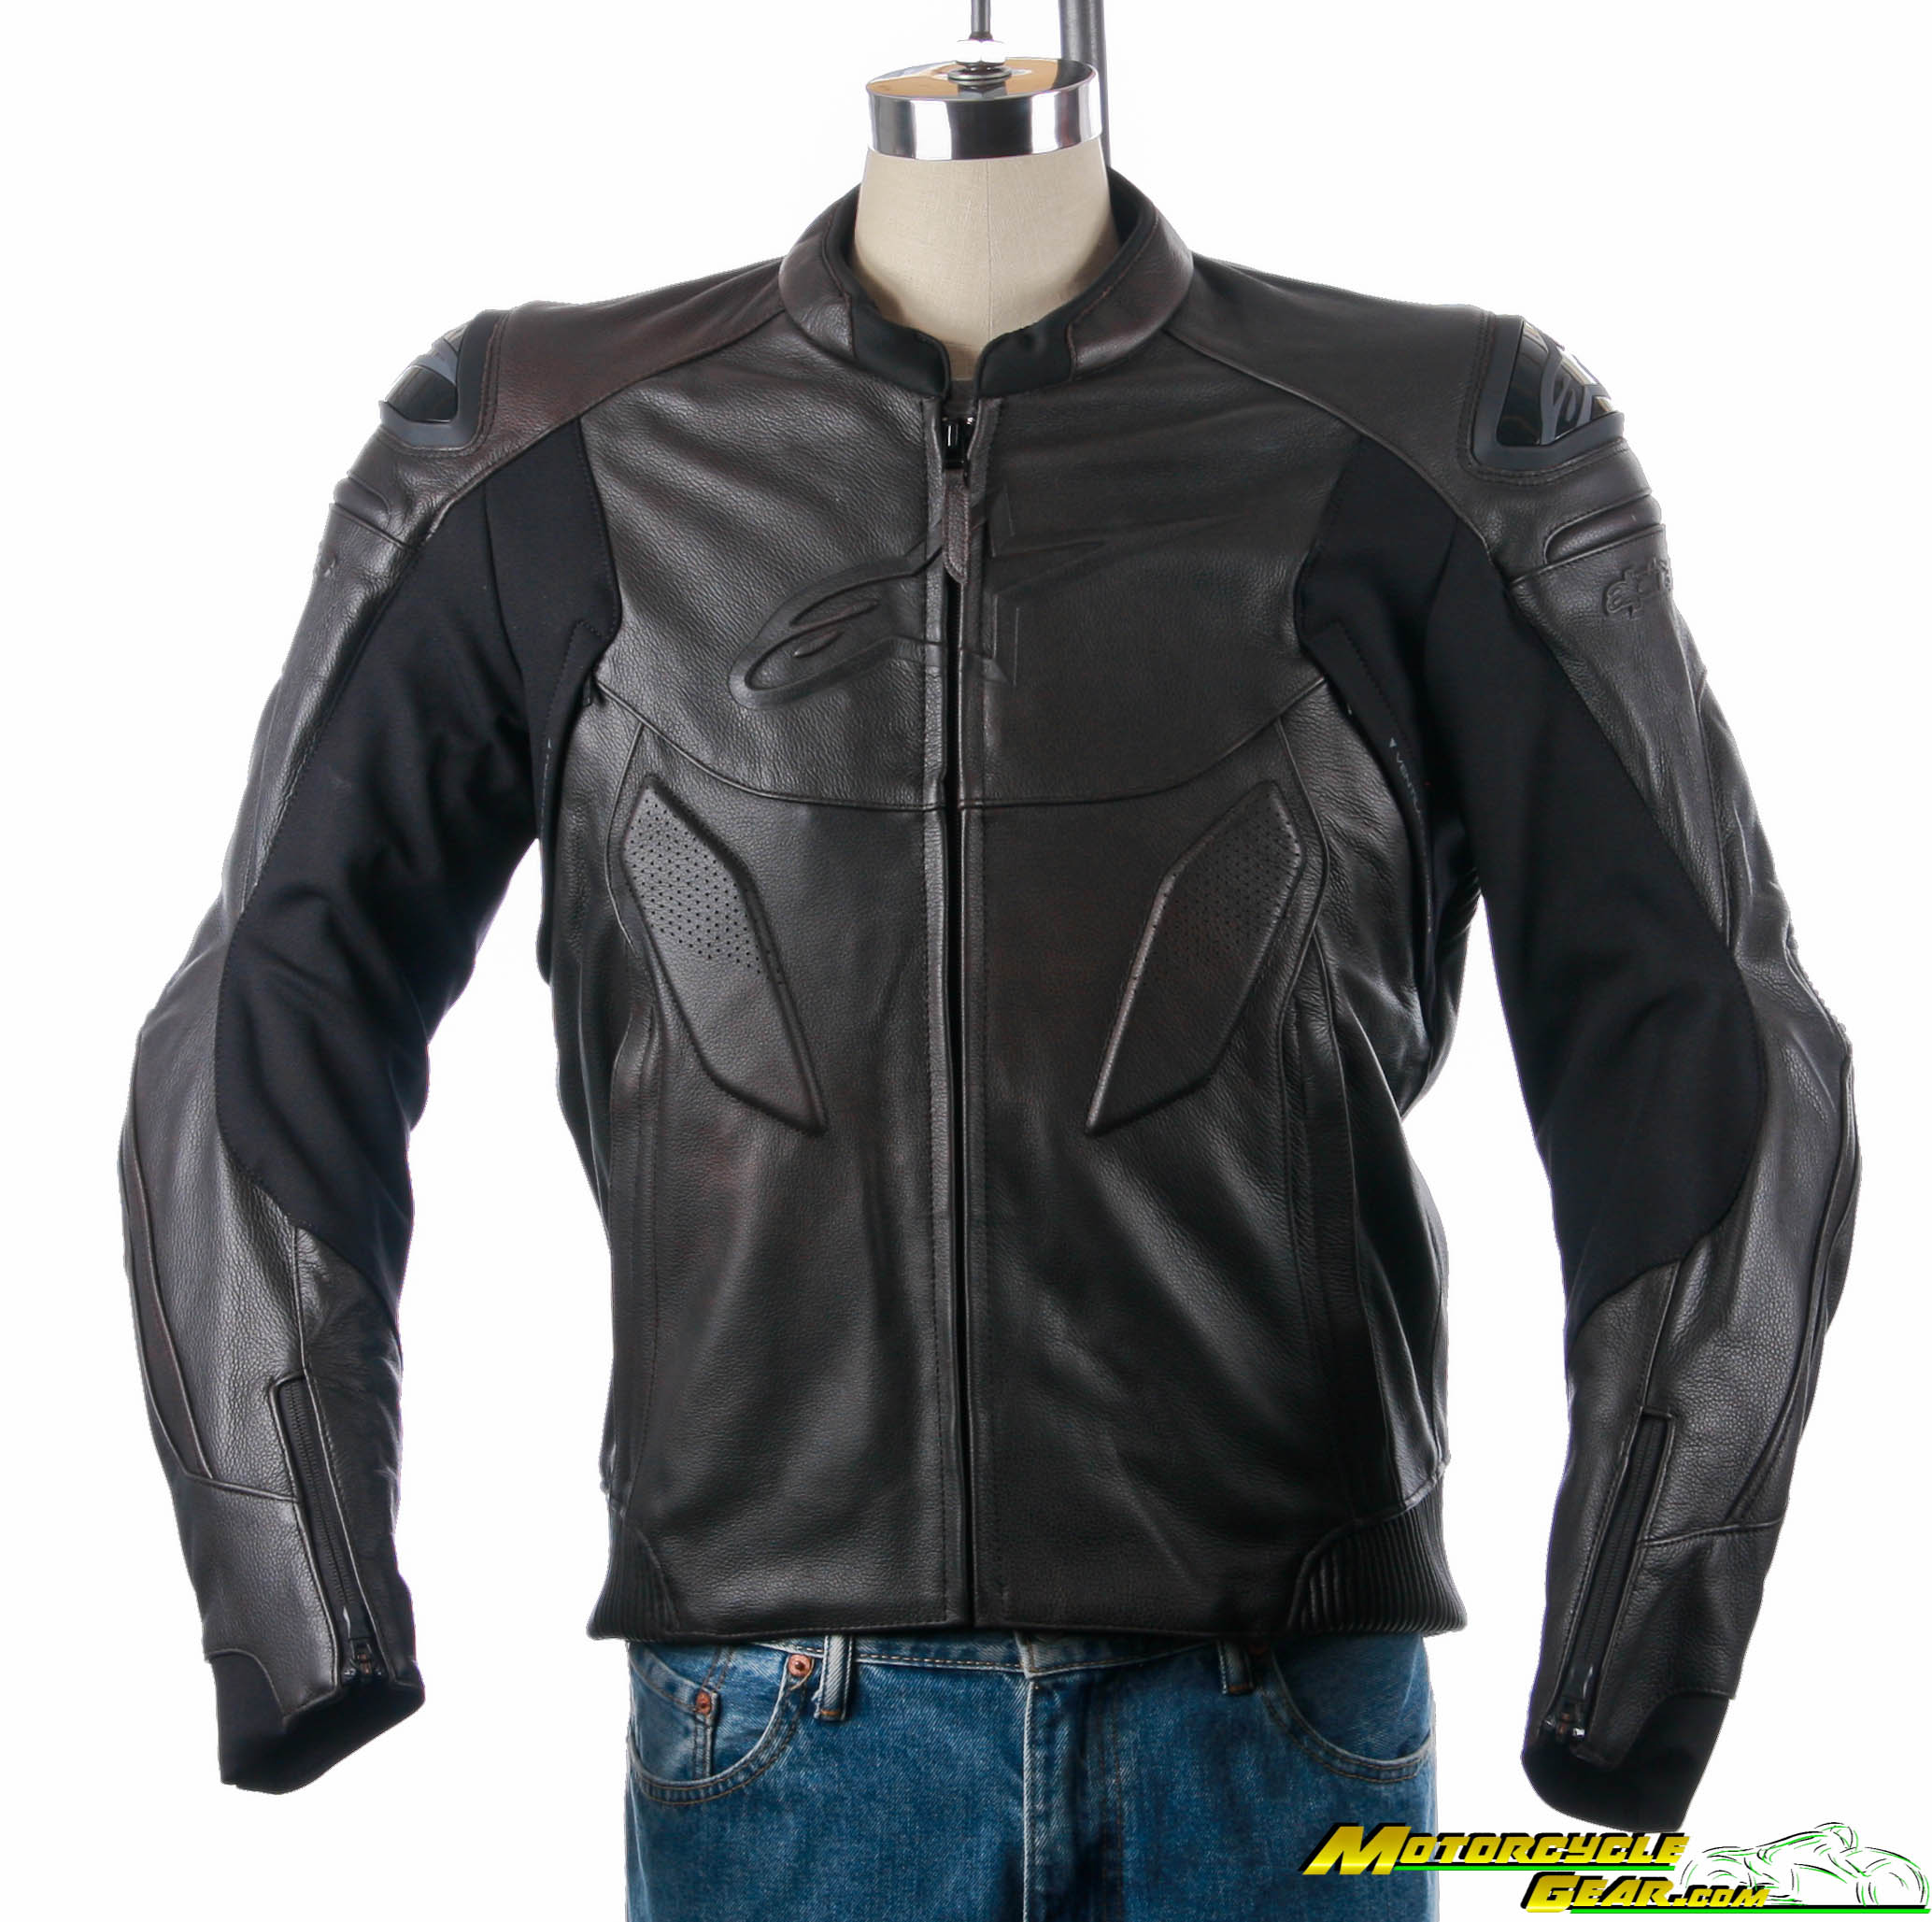 Viewing Images For Alpinestars Caliber Leather Jacket :: MotorcycleGear.com